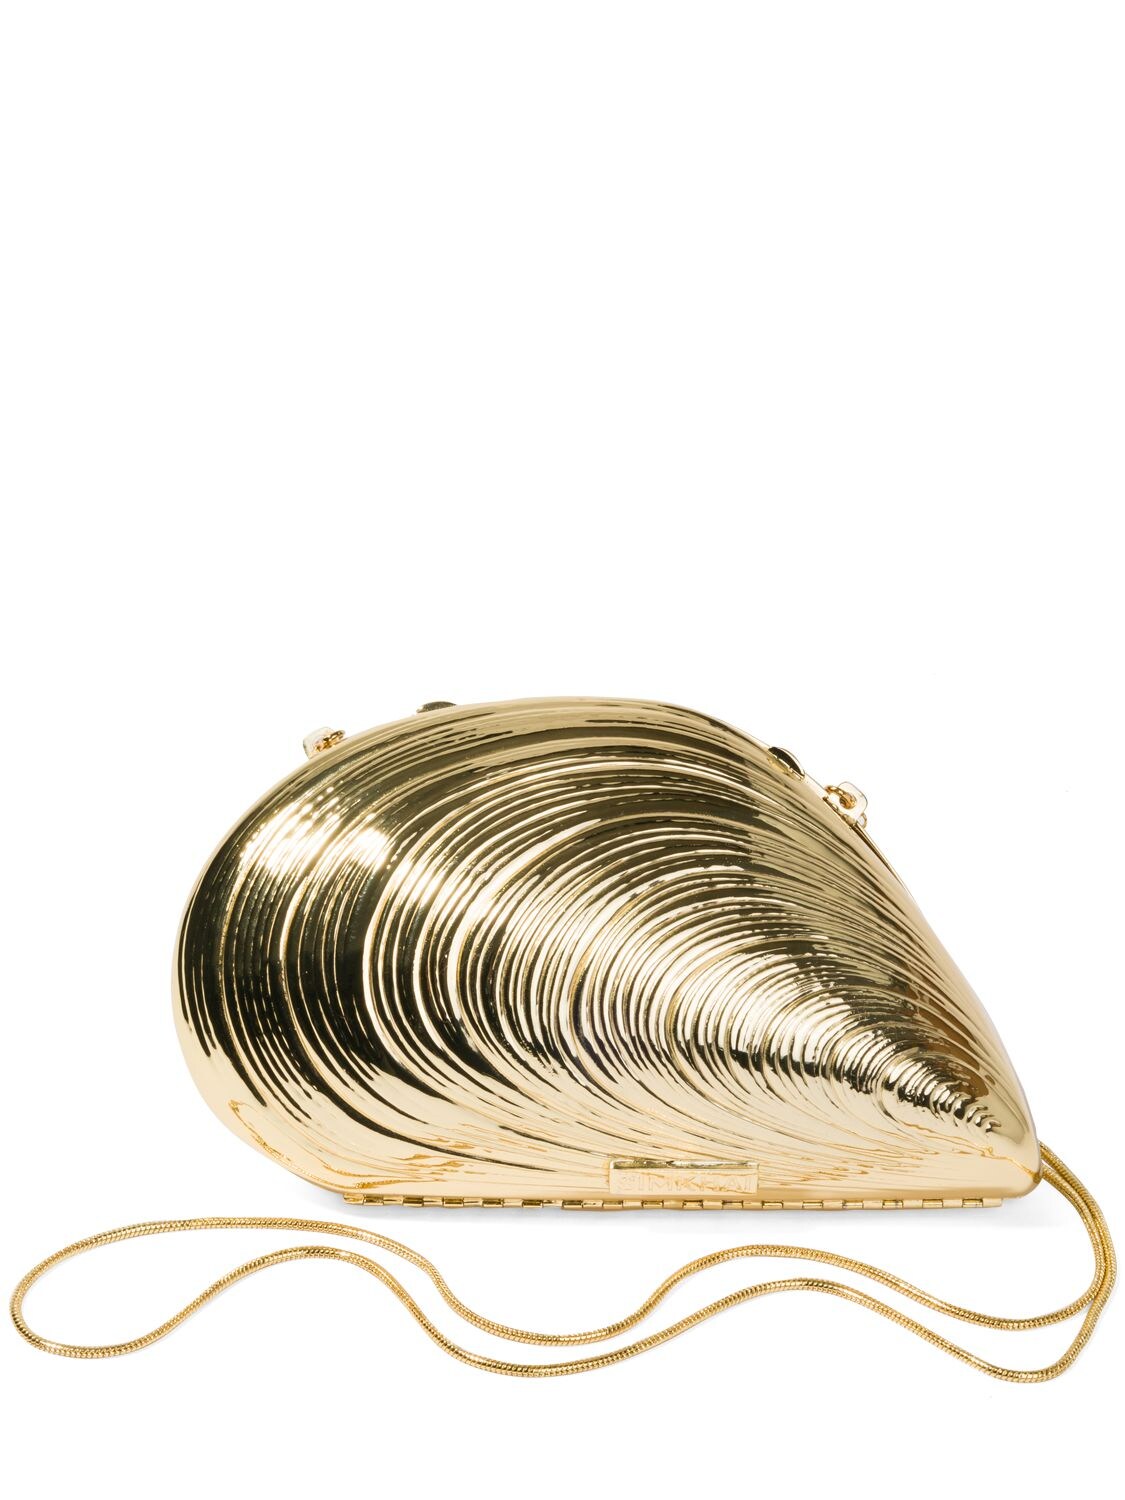 Image of Bridget Metal Oyster Shell Clutch